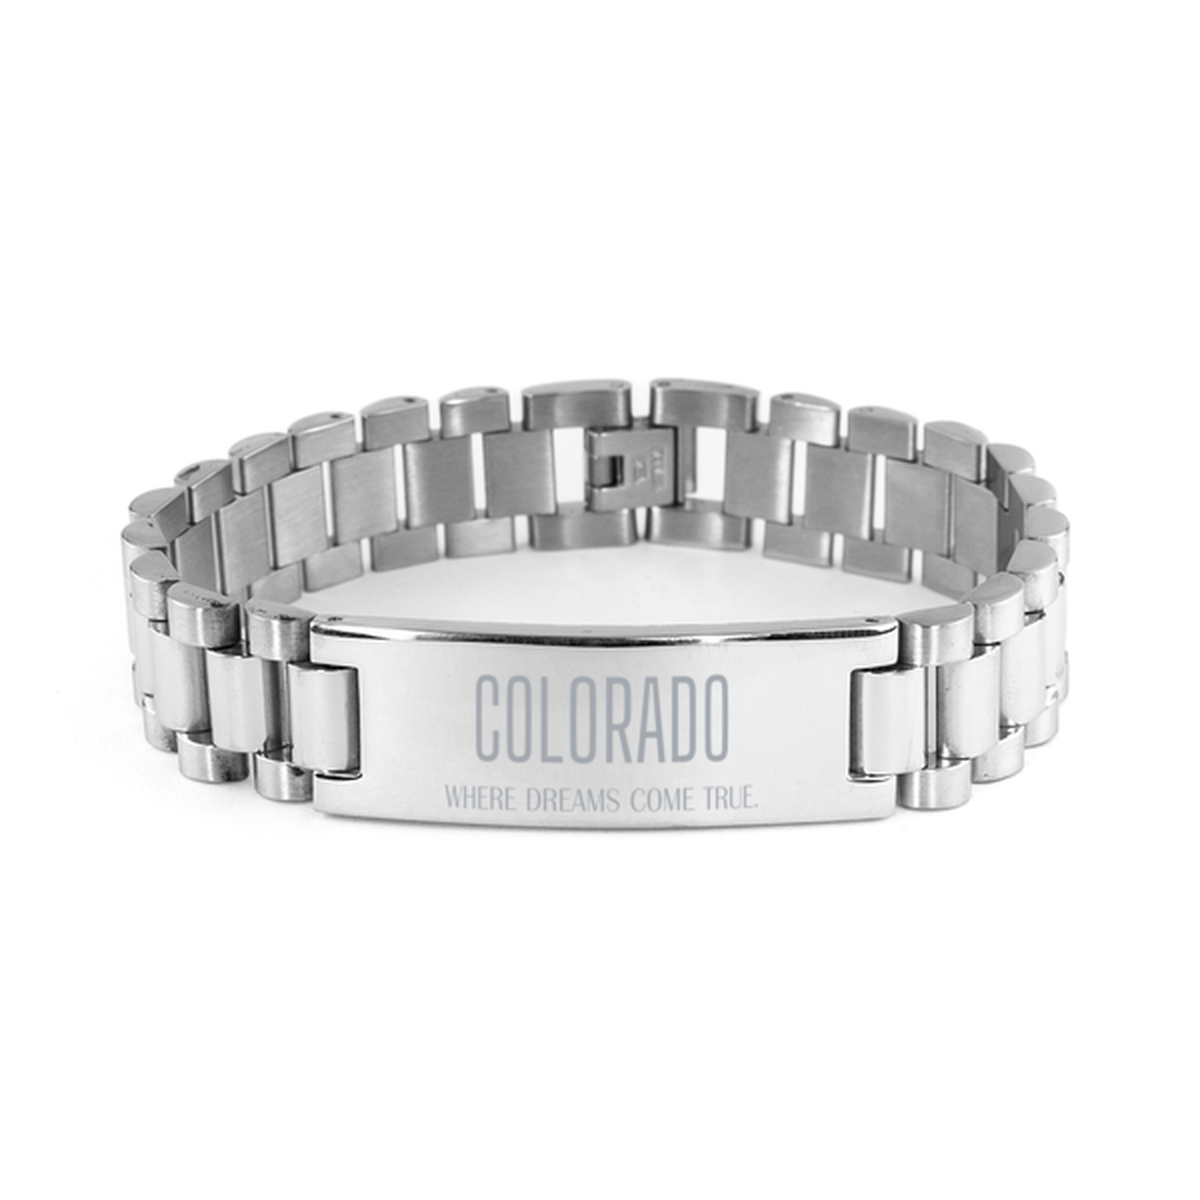 Love Colorado State Ladder Stainless Steel Bracelet, Colorado Where dreams come true, Birthday Inspirational Gifts For Colorado Men, Women, Friends